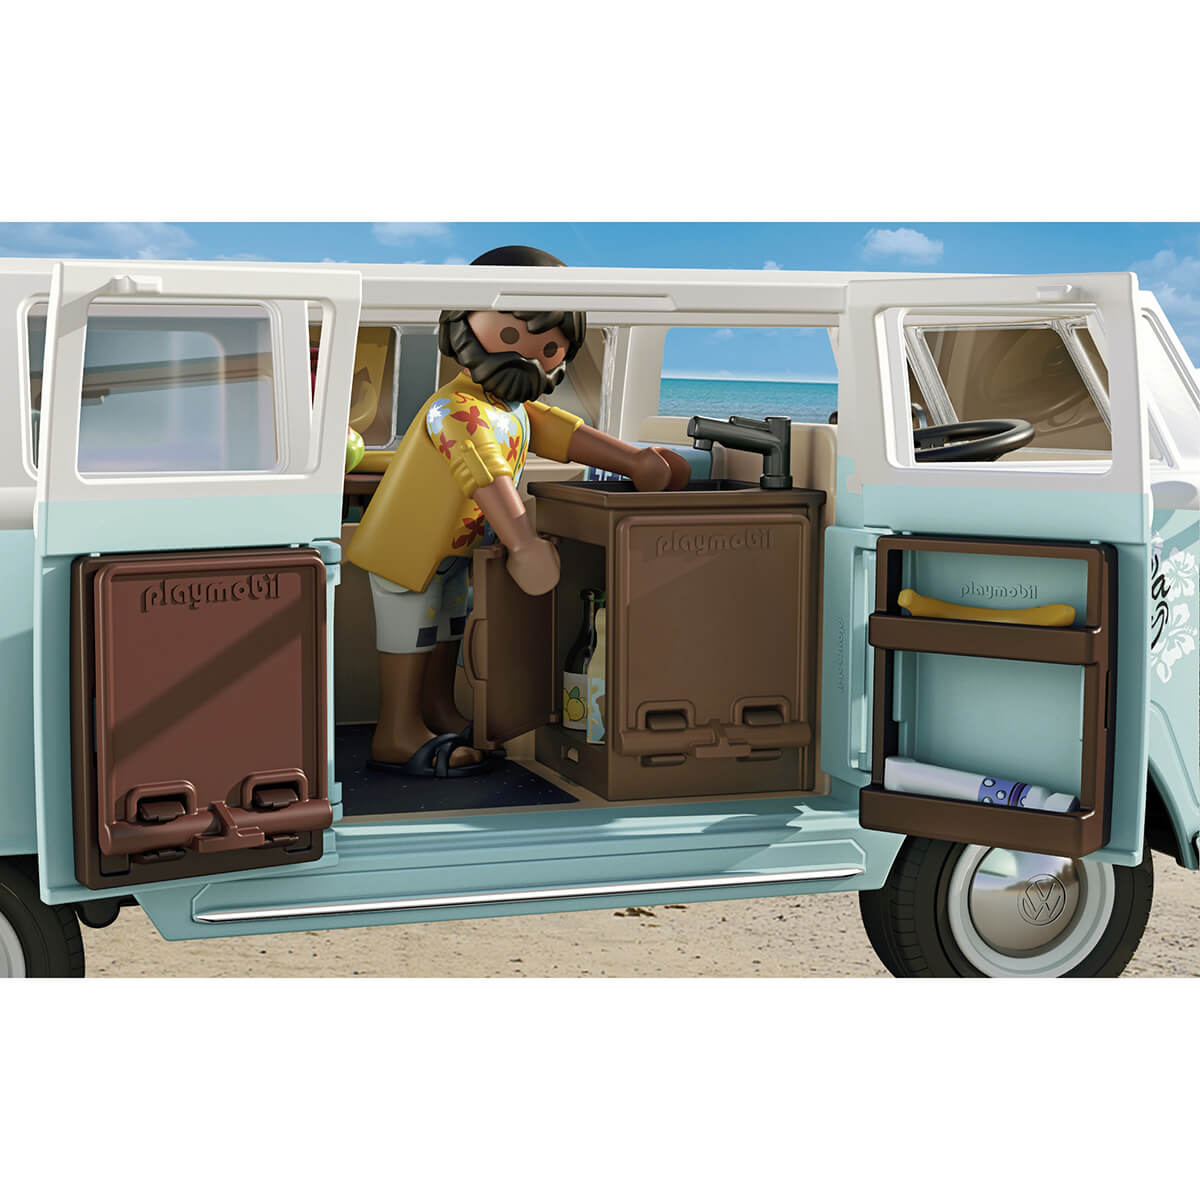 PLAYMOBIL VW Volkswagen T1 Camping Bus Special Edition (70826)